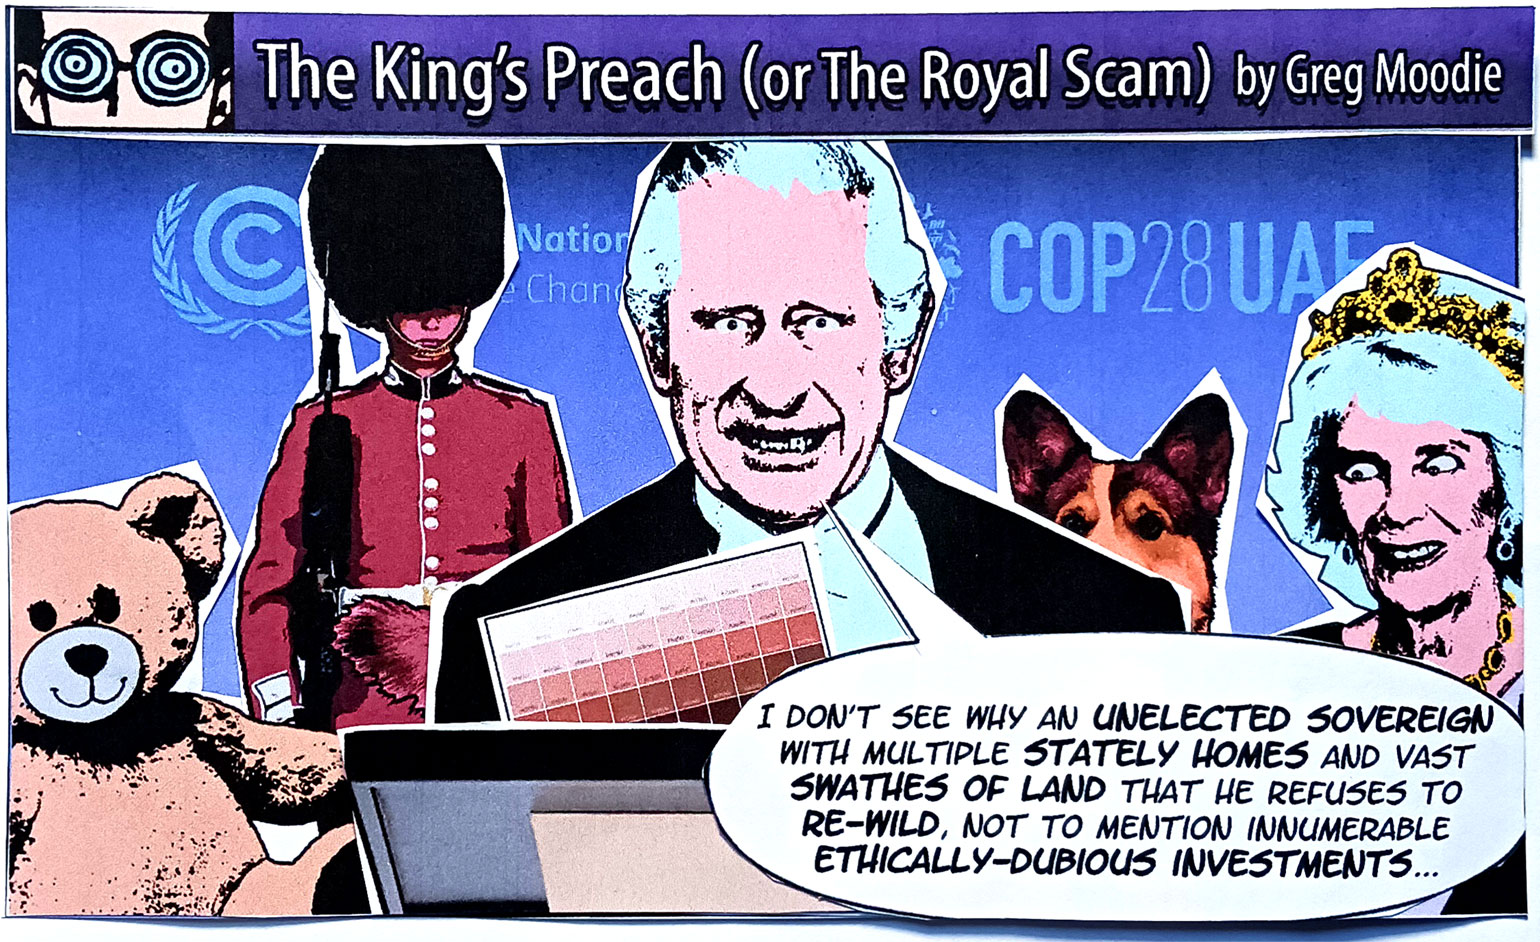 The King's Preach (or The Royal Scam)